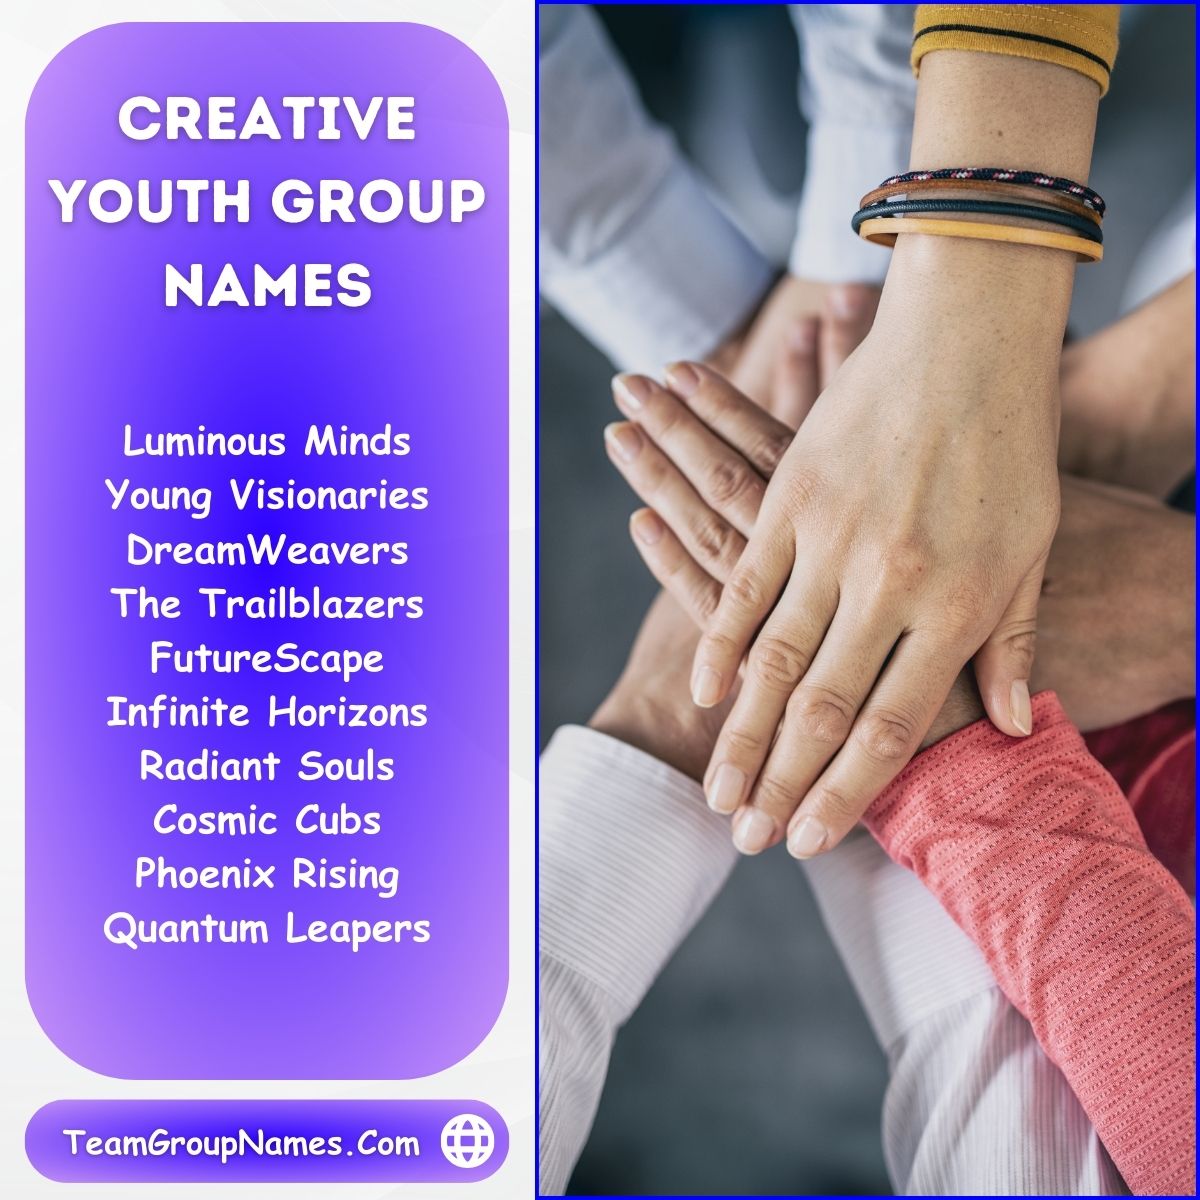 Creative Youth Group Names